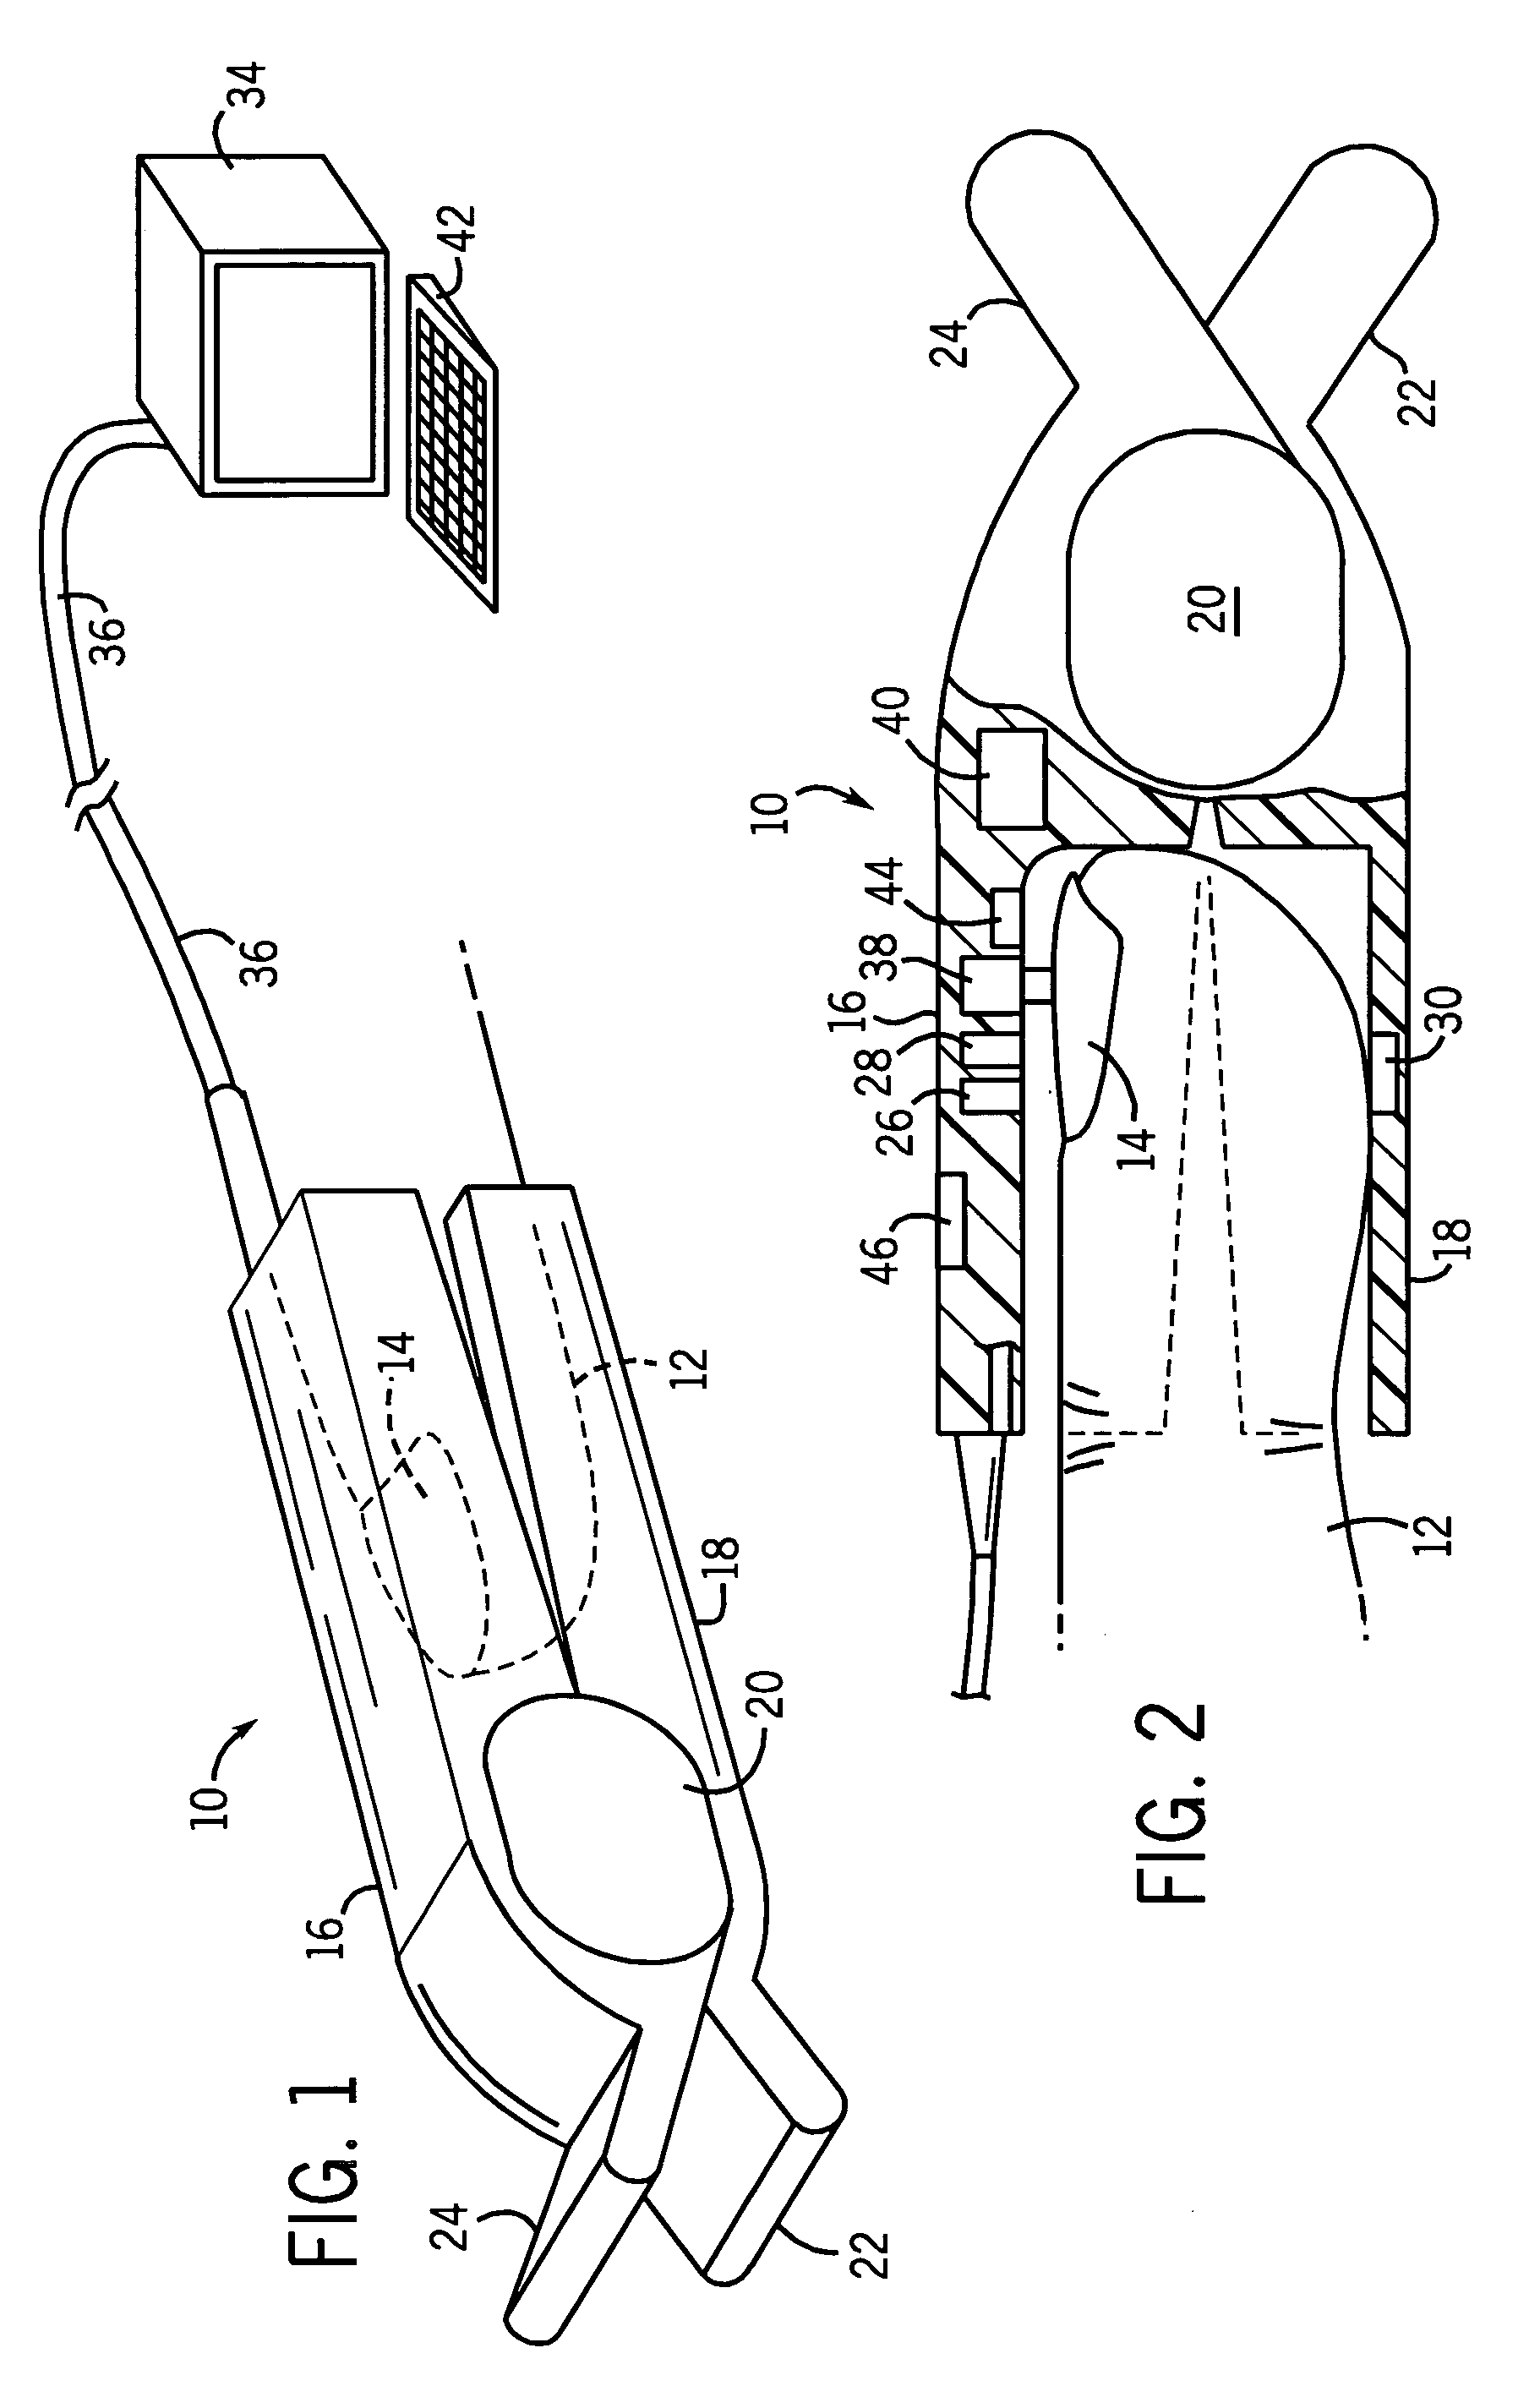 Method and apparatus for measuring capillary refill time and carrying out pulse oximetry with a single device